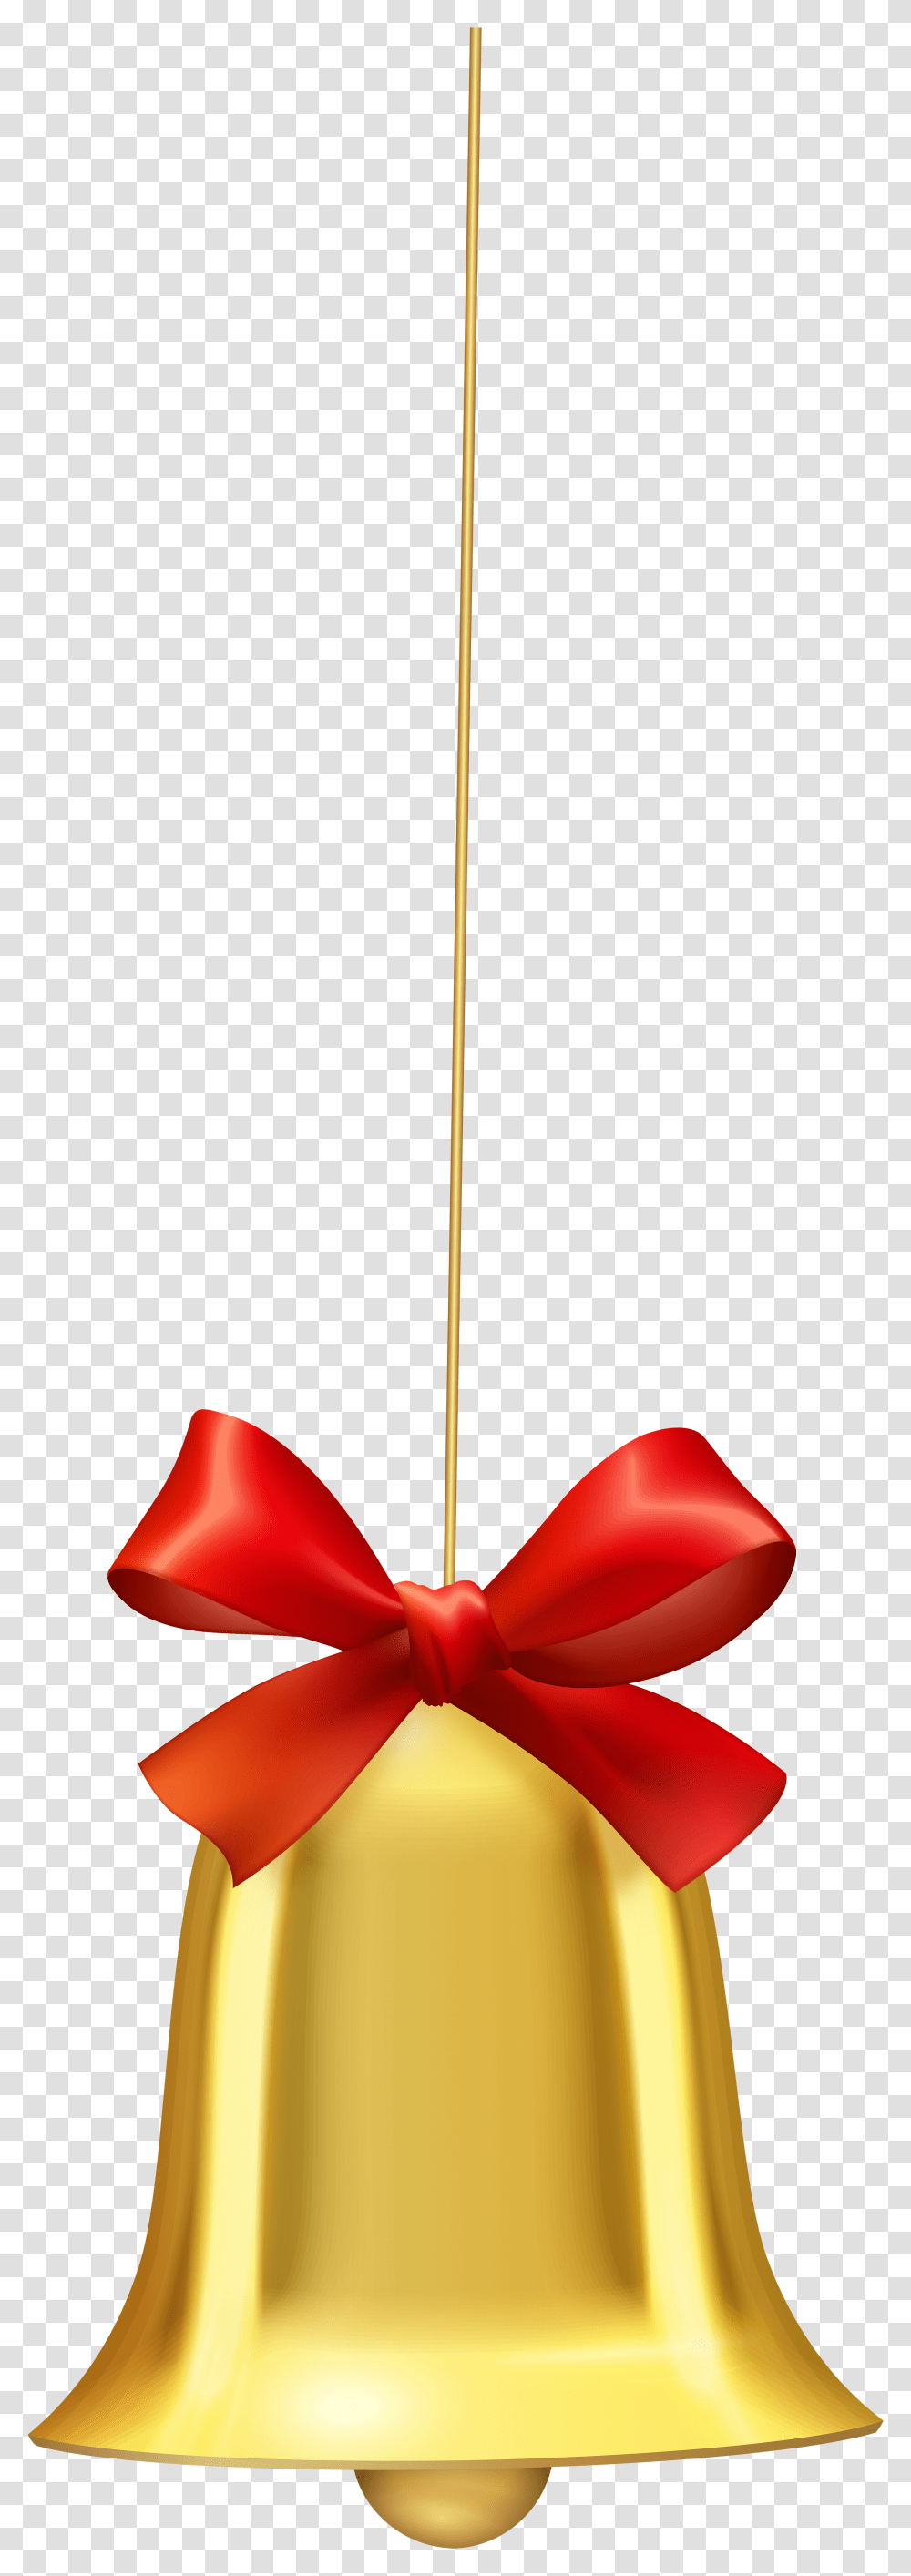 Download Hd Christmas Bell Hanging Hanging Christmas Bells, Lamp, Ornament Transparent Png